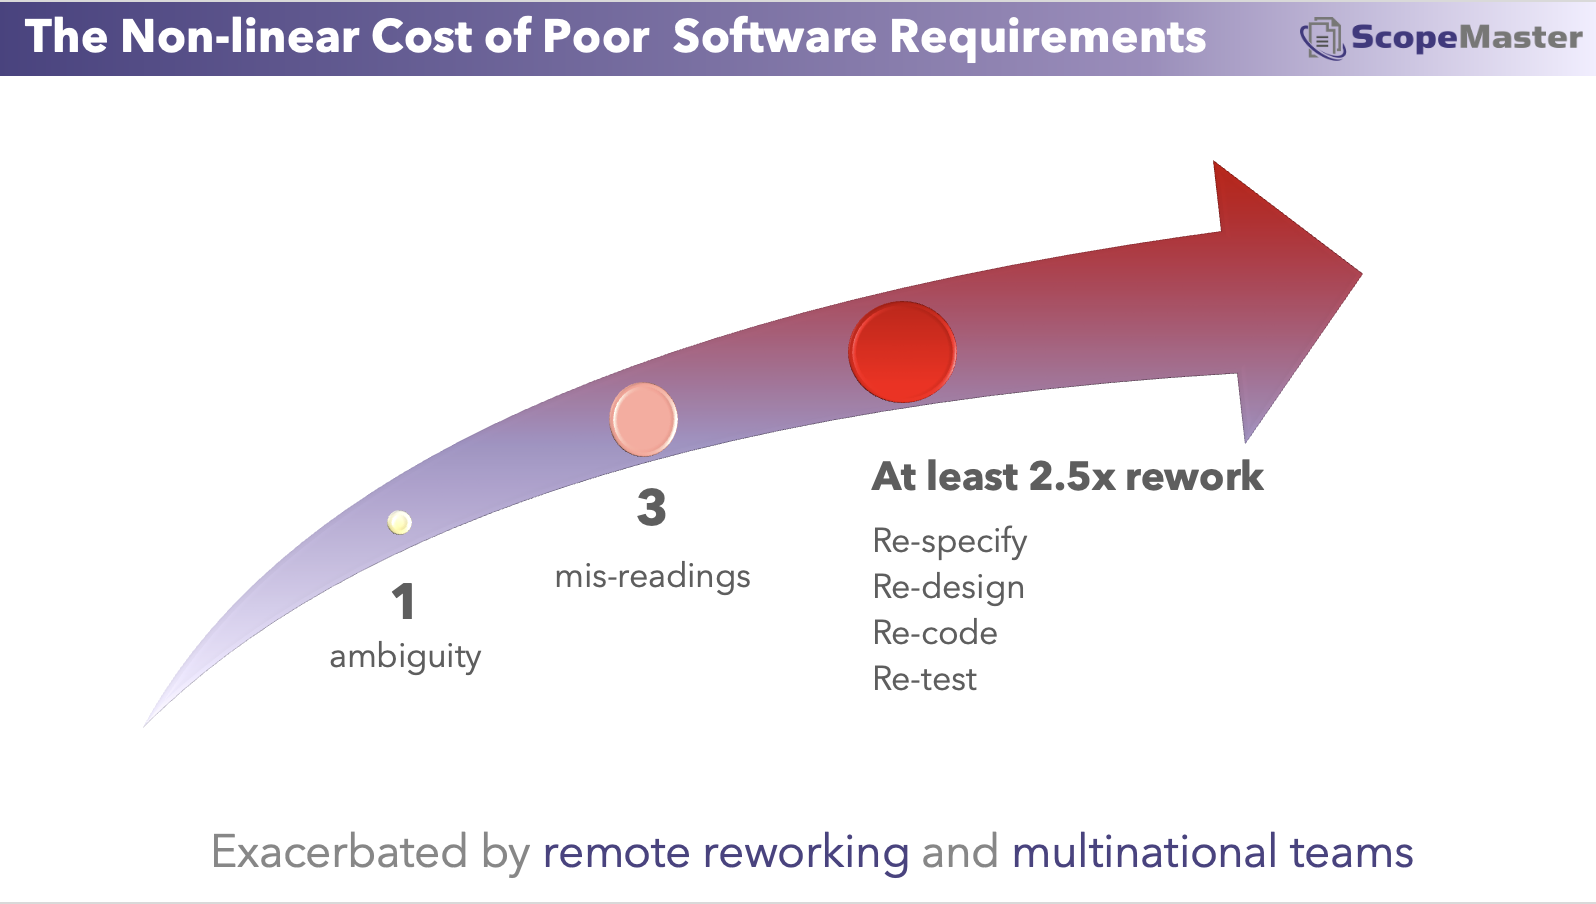 The cost of poor quality software requirements in generating rework